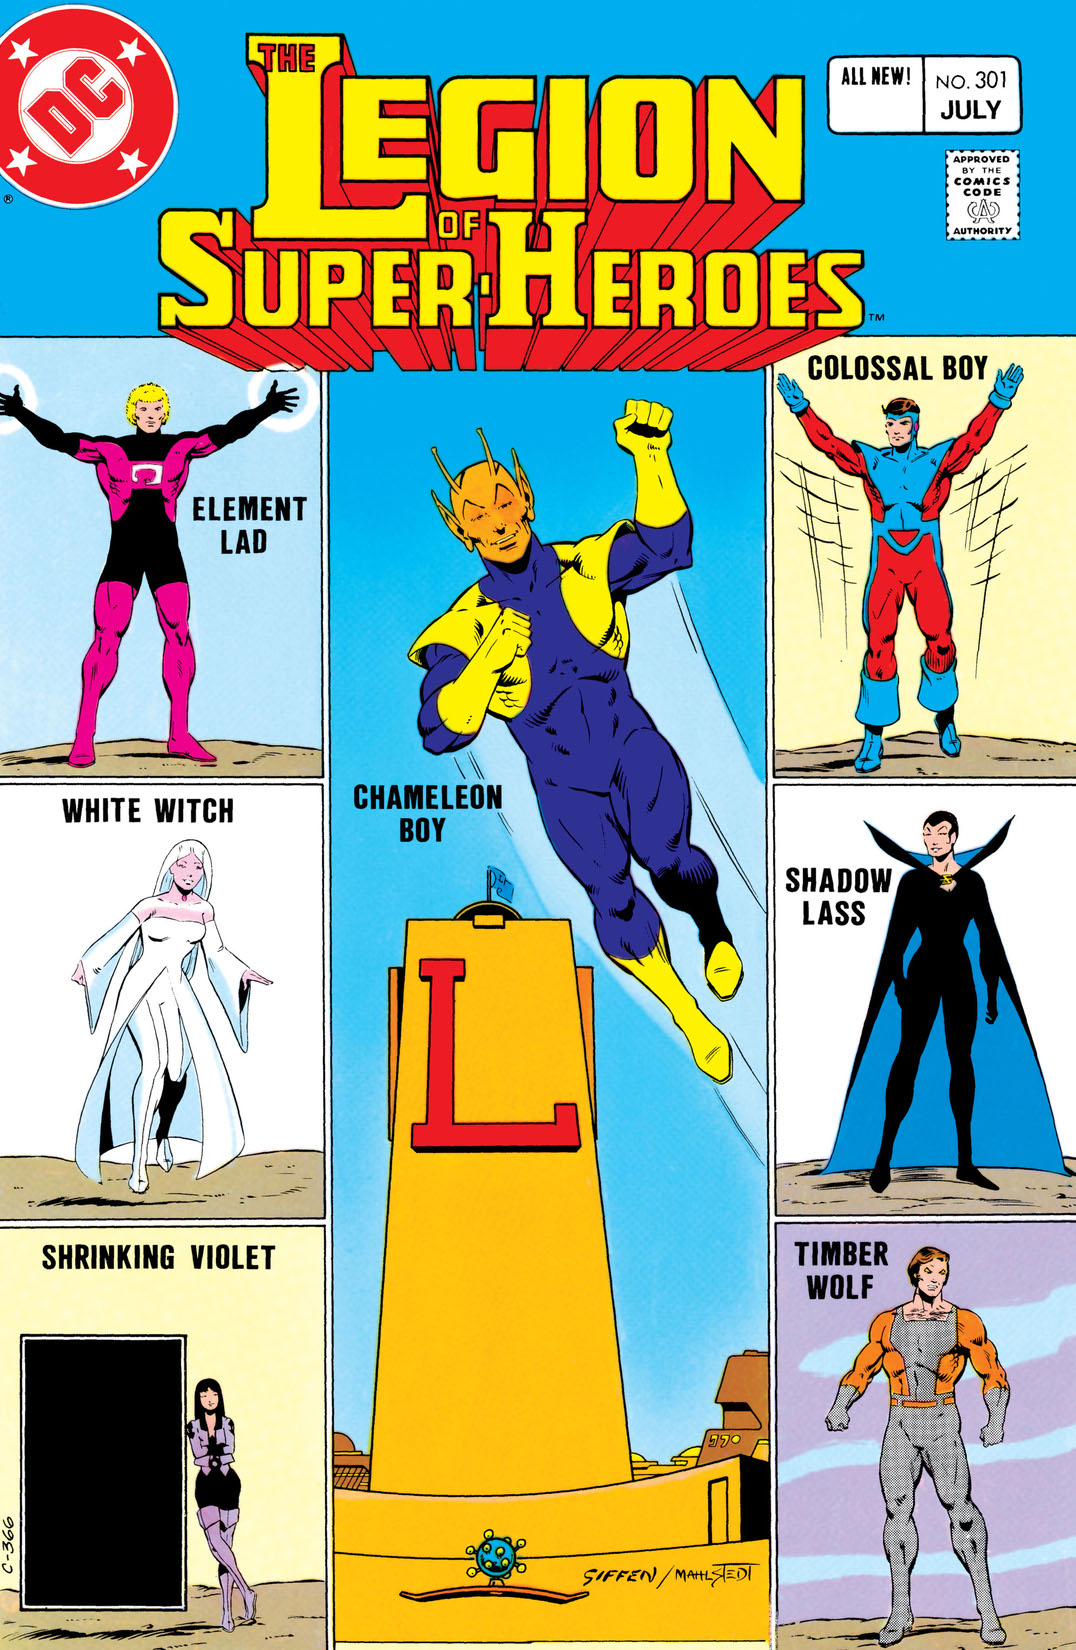 The Legion of Super-Heroes (1980-) #301 preview images